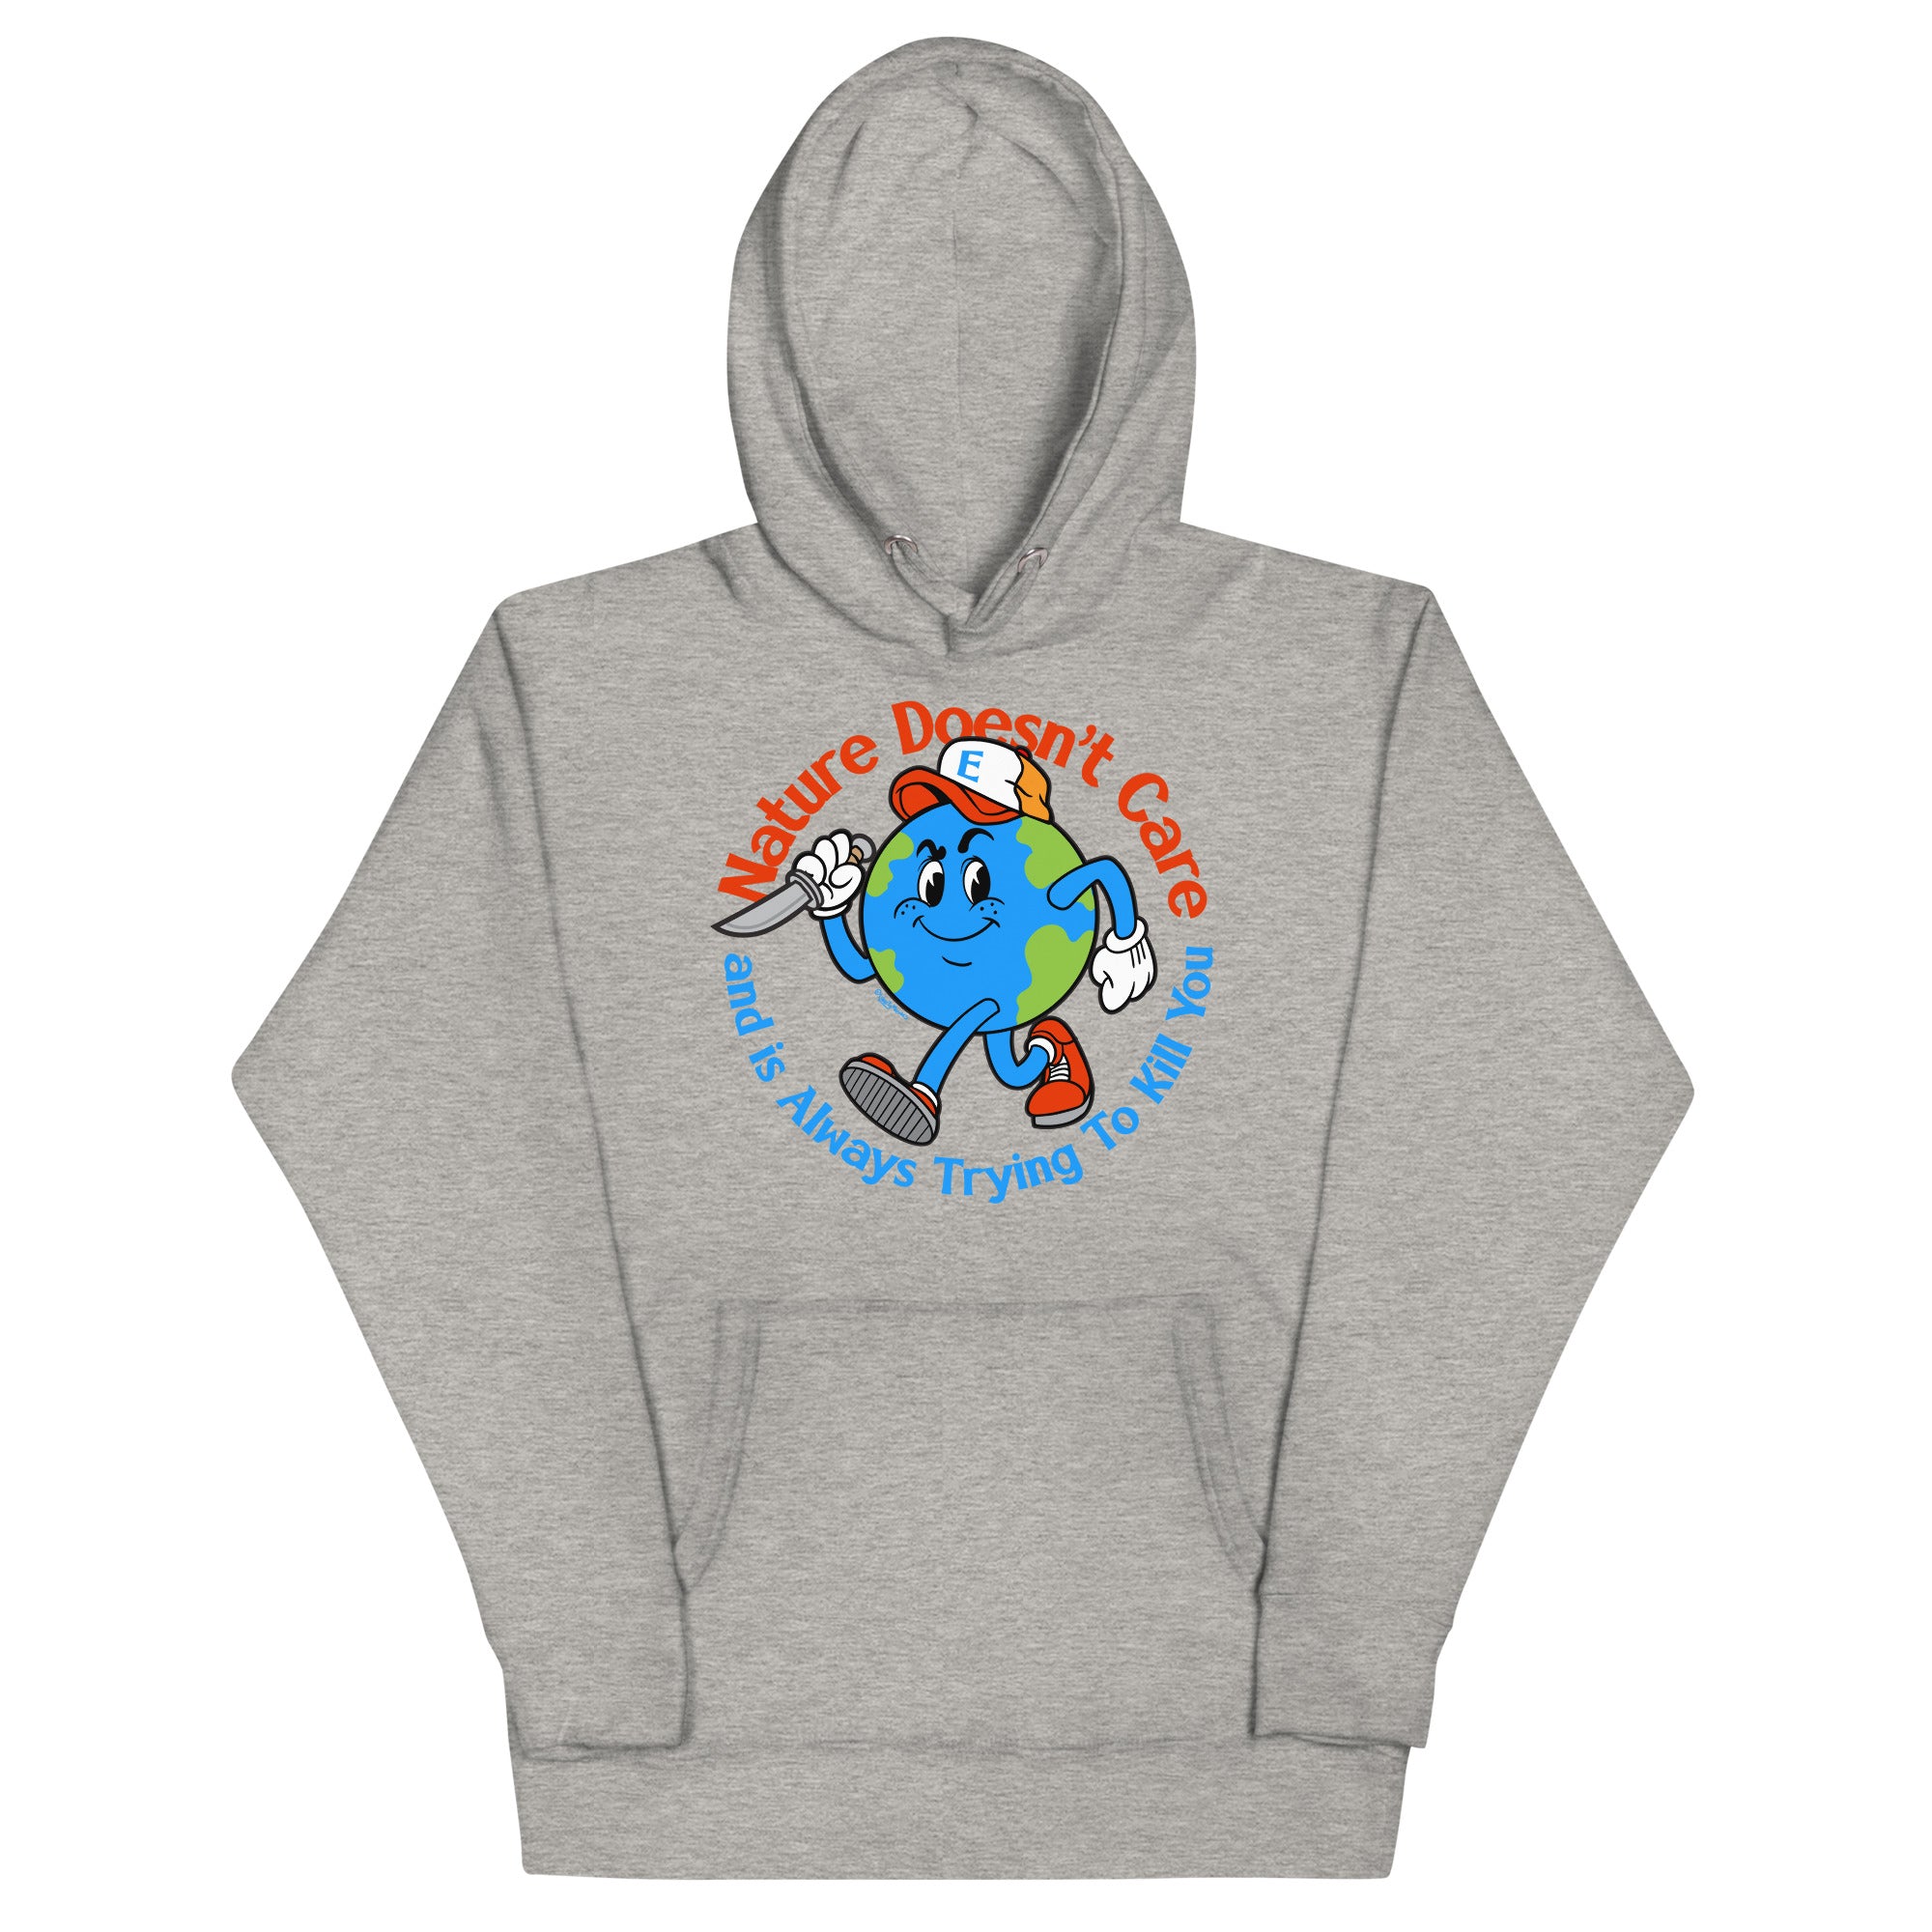 Nature Doesn't Care Hoodie